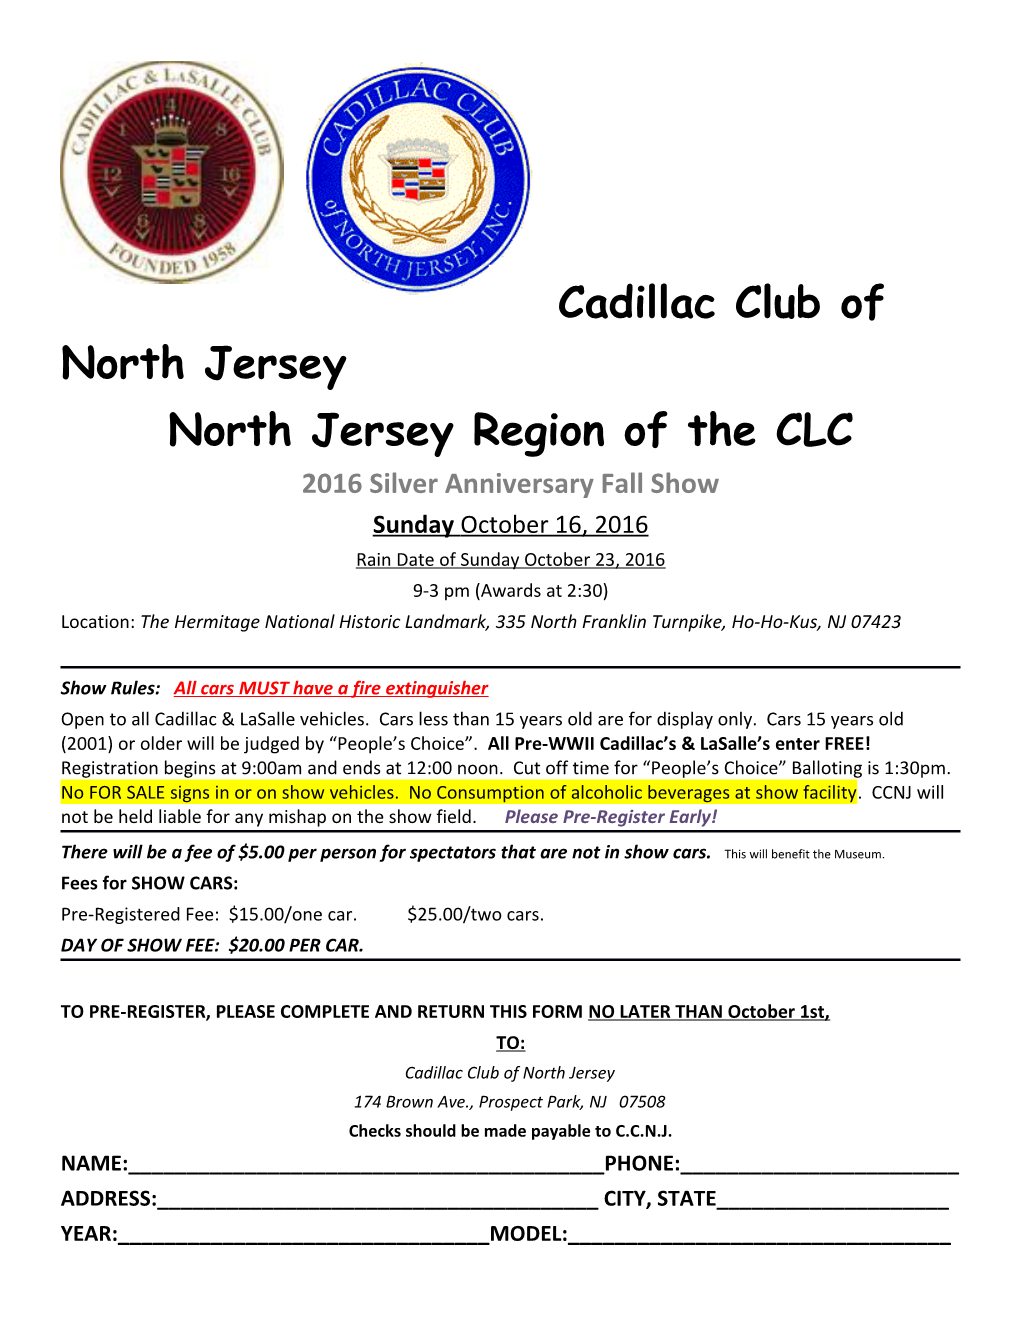 North Jersey Region of the CLC